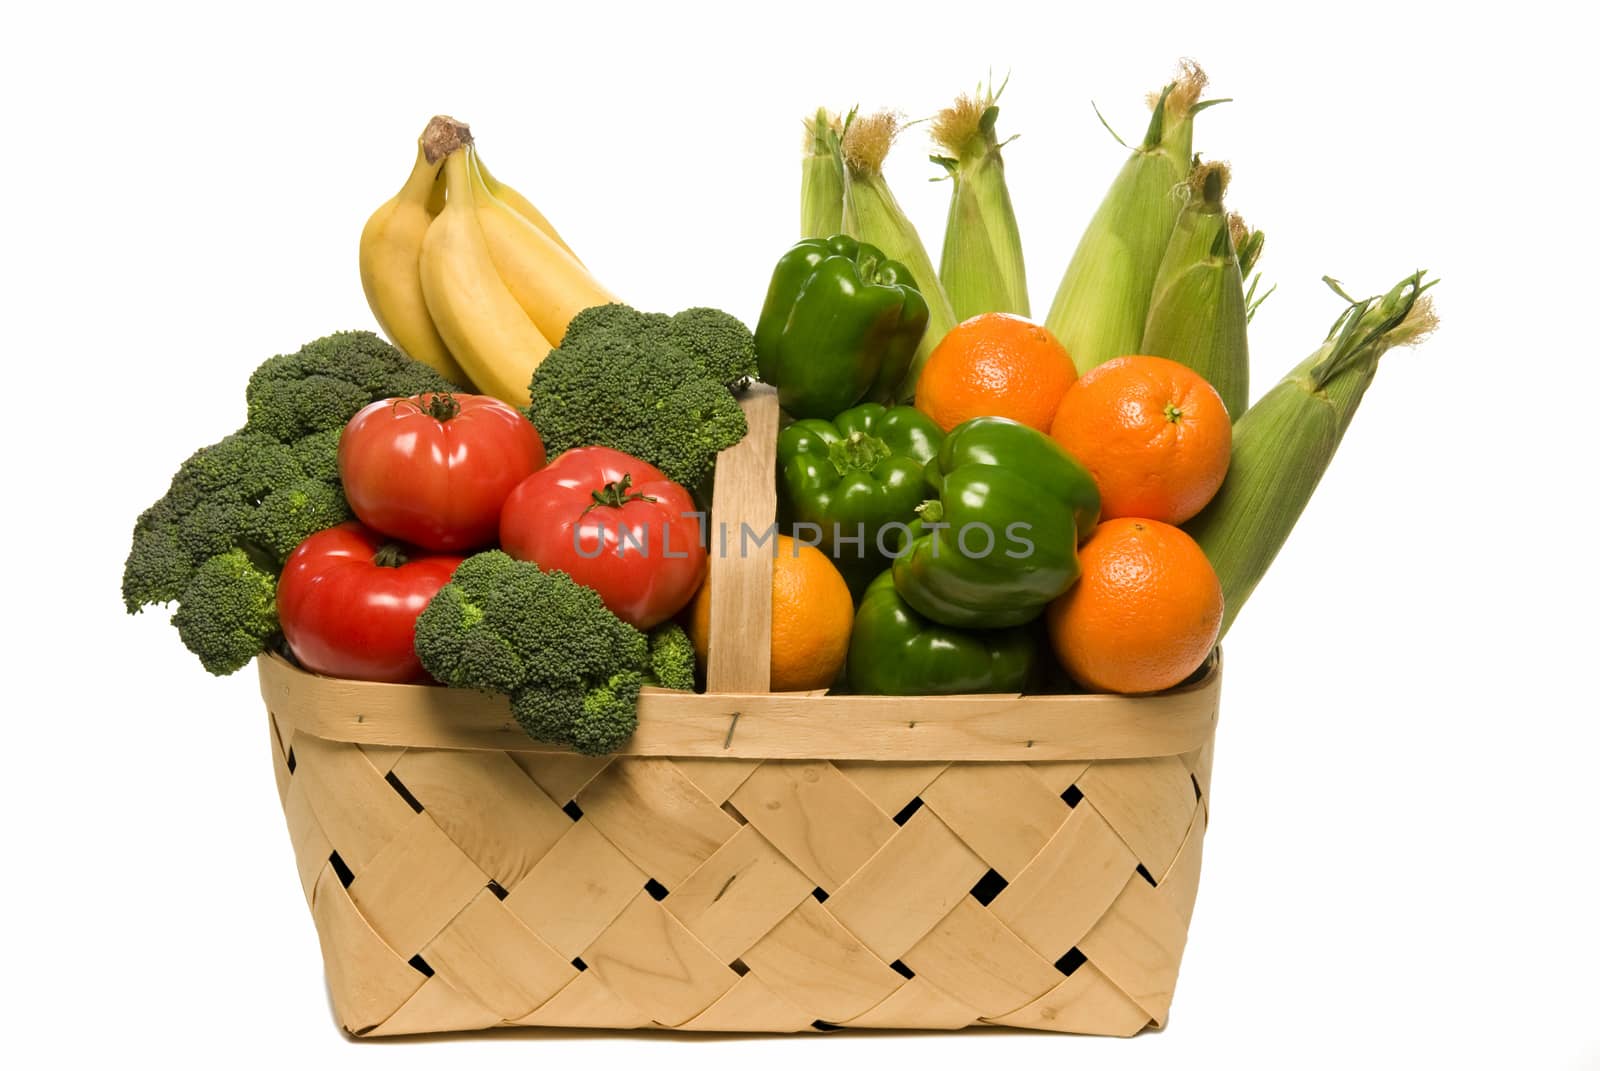 Fresh Vegetable And Fruit Basket by stockbuster1